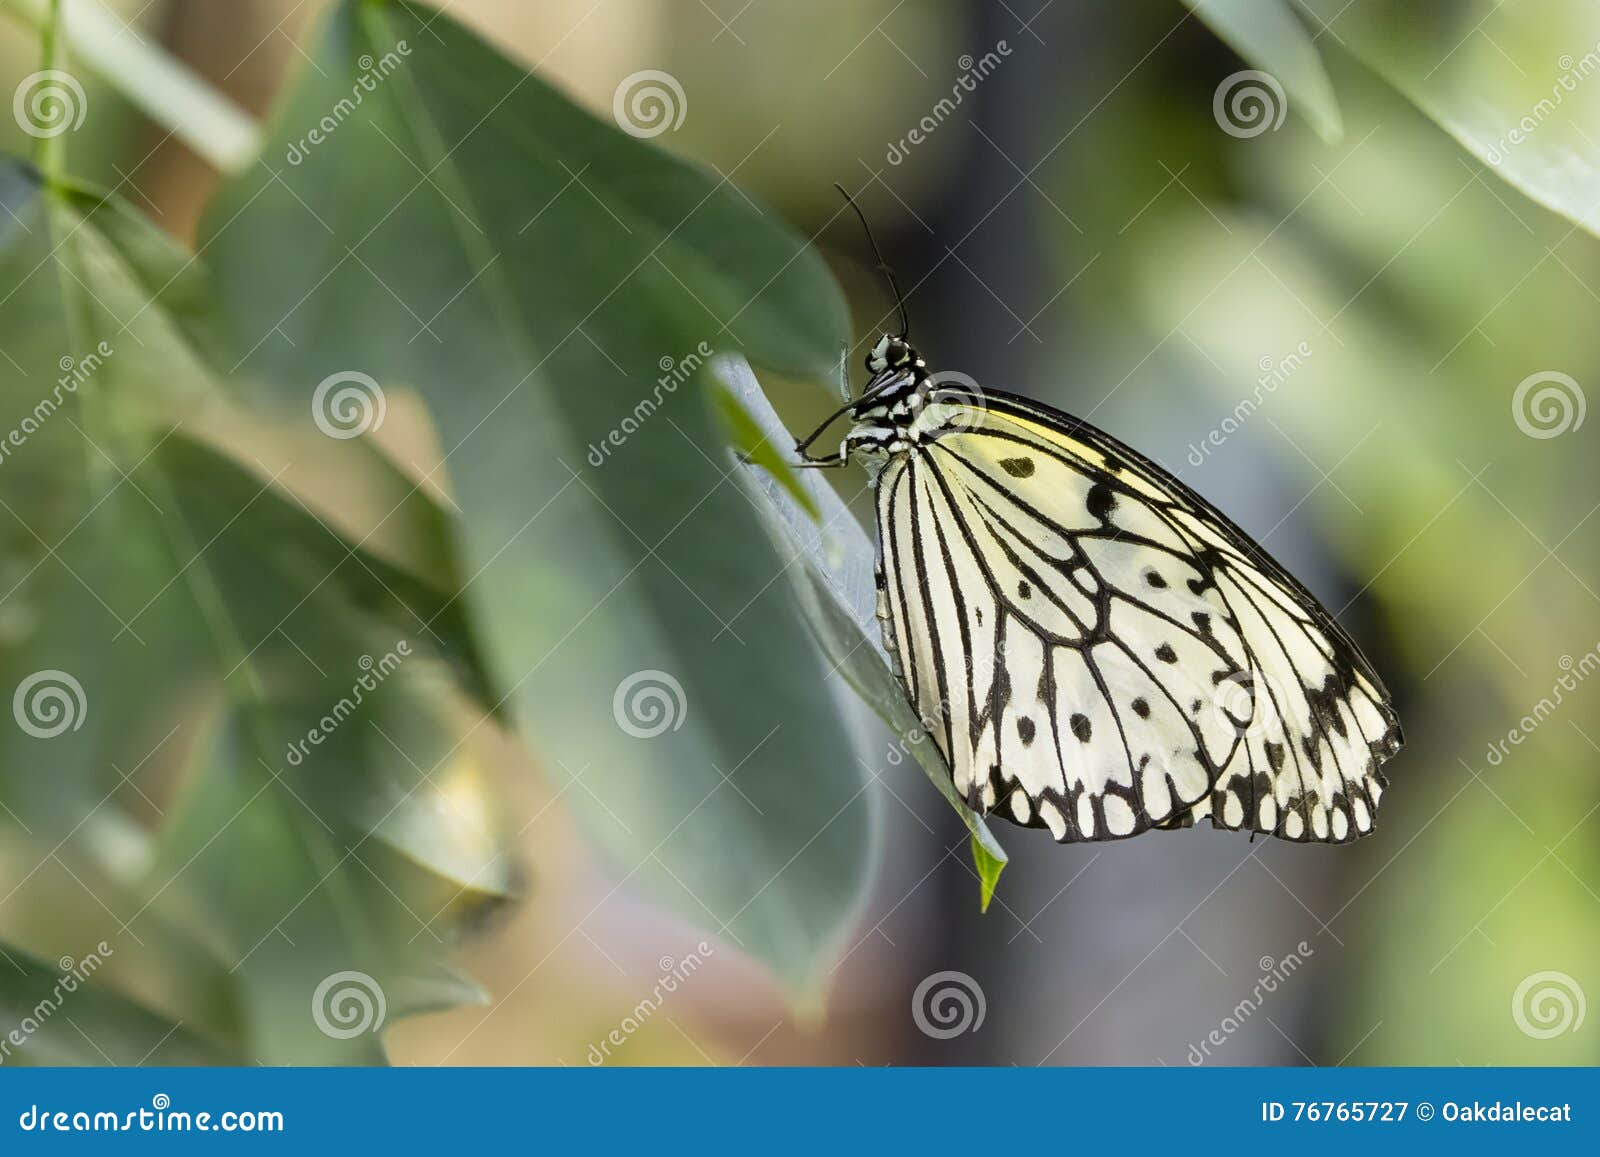 Paper Kite Butterfly stock image. Image of paper, pattern - 76765727